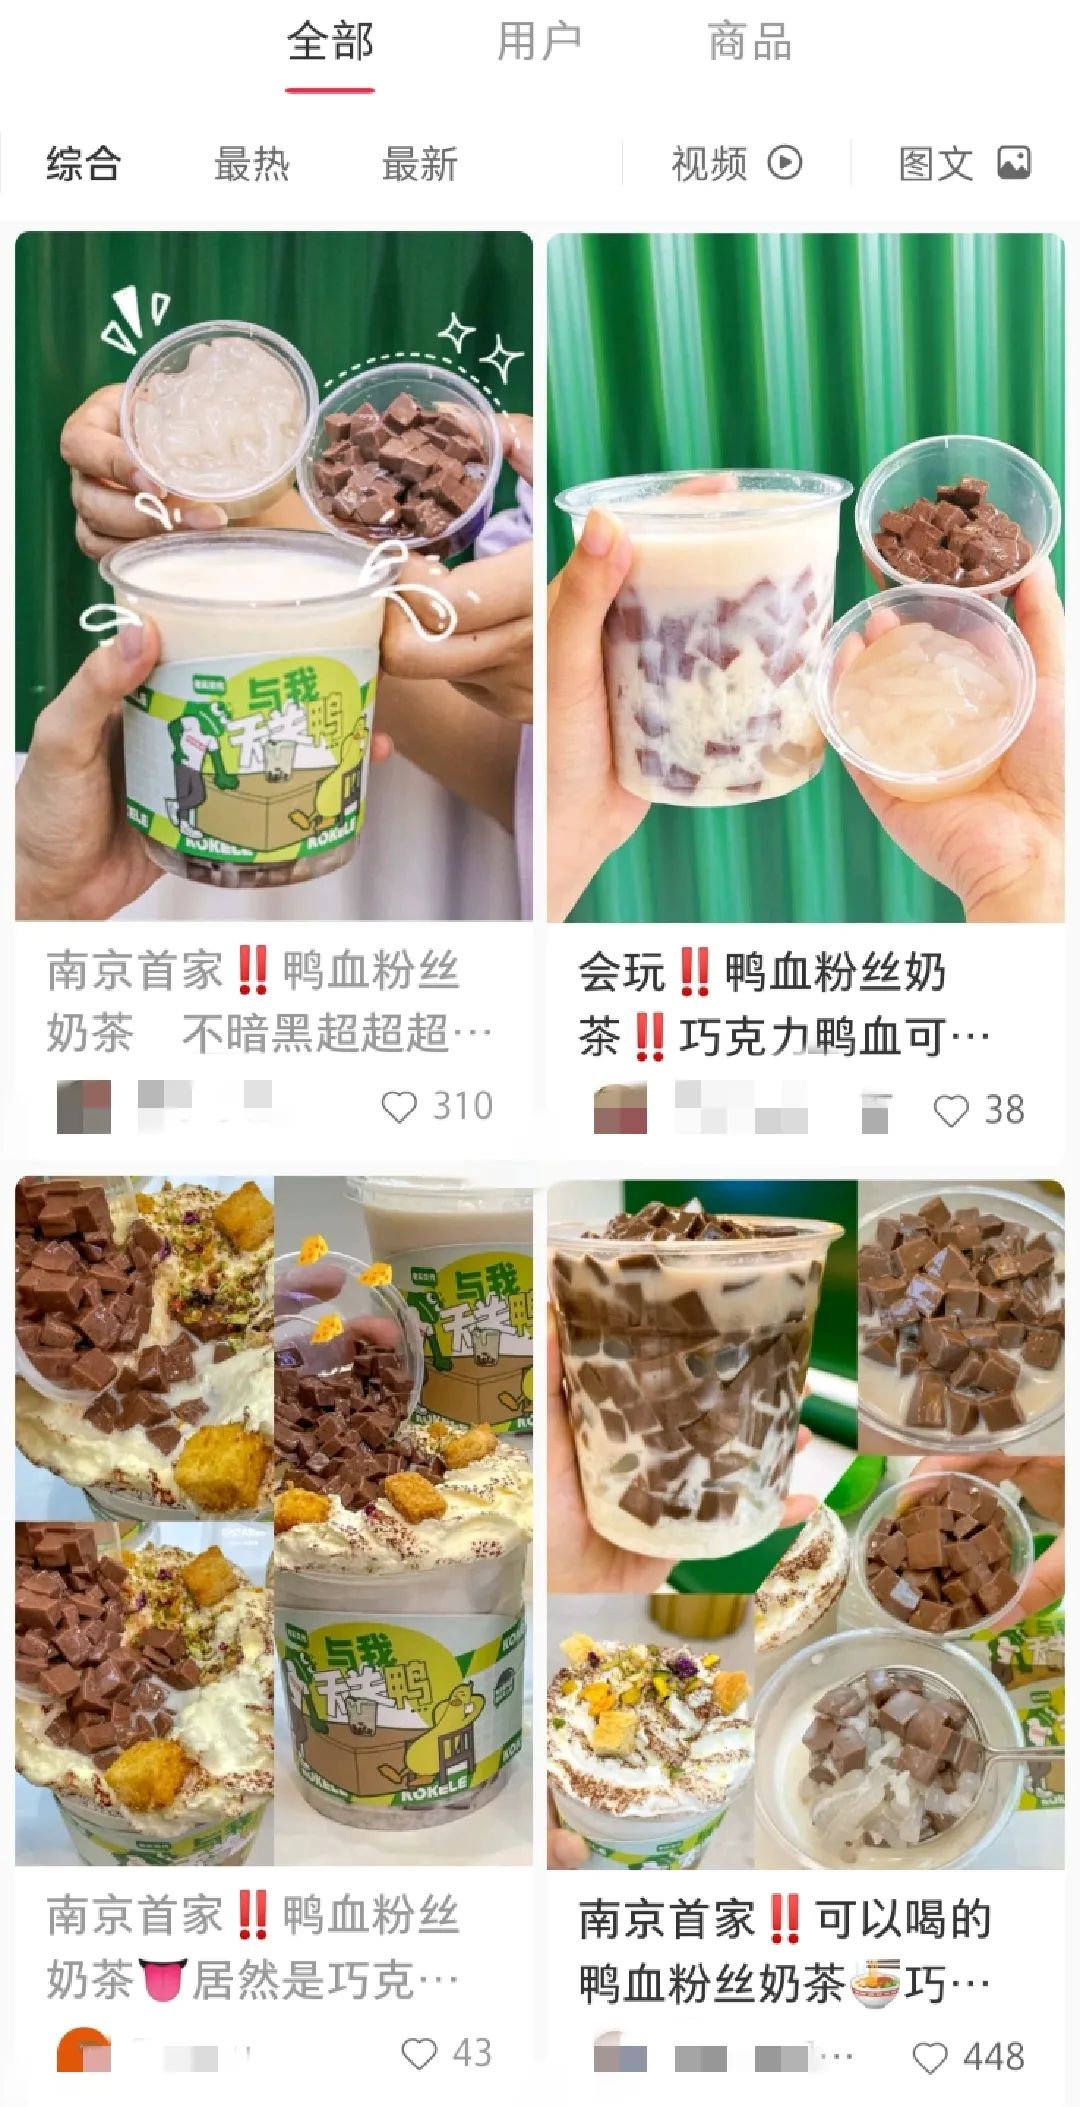 What are the new creative marketing ideas of the milk tea shop? A milk tea shop in Nanjing launched duck blood vermicelli milk tea